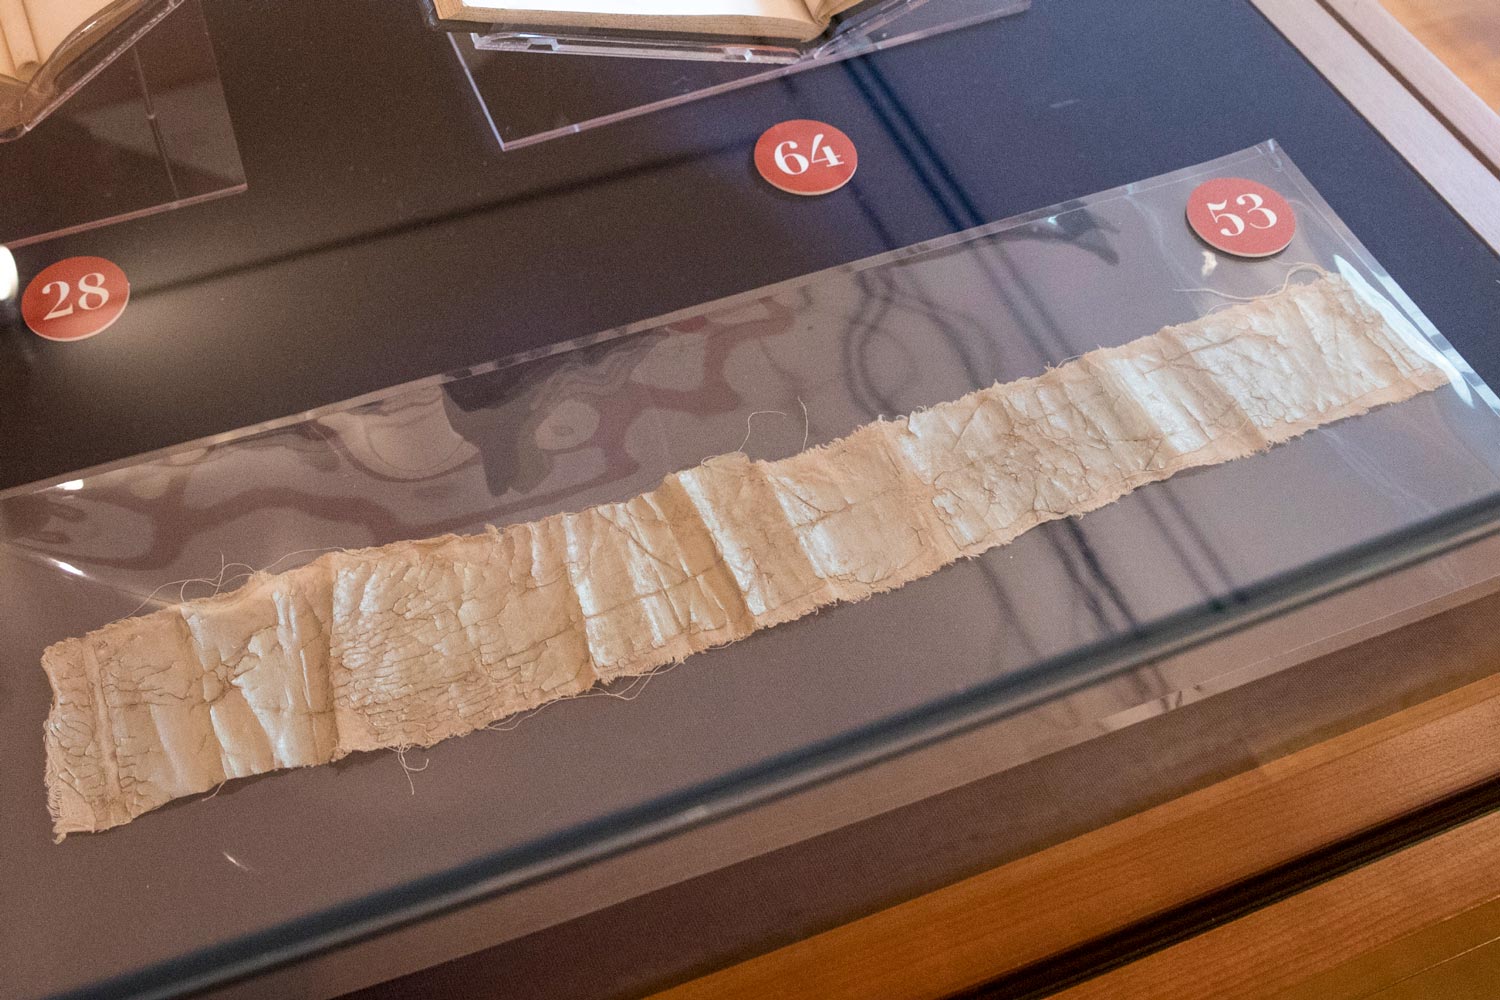 A strip of old fabric in a display case